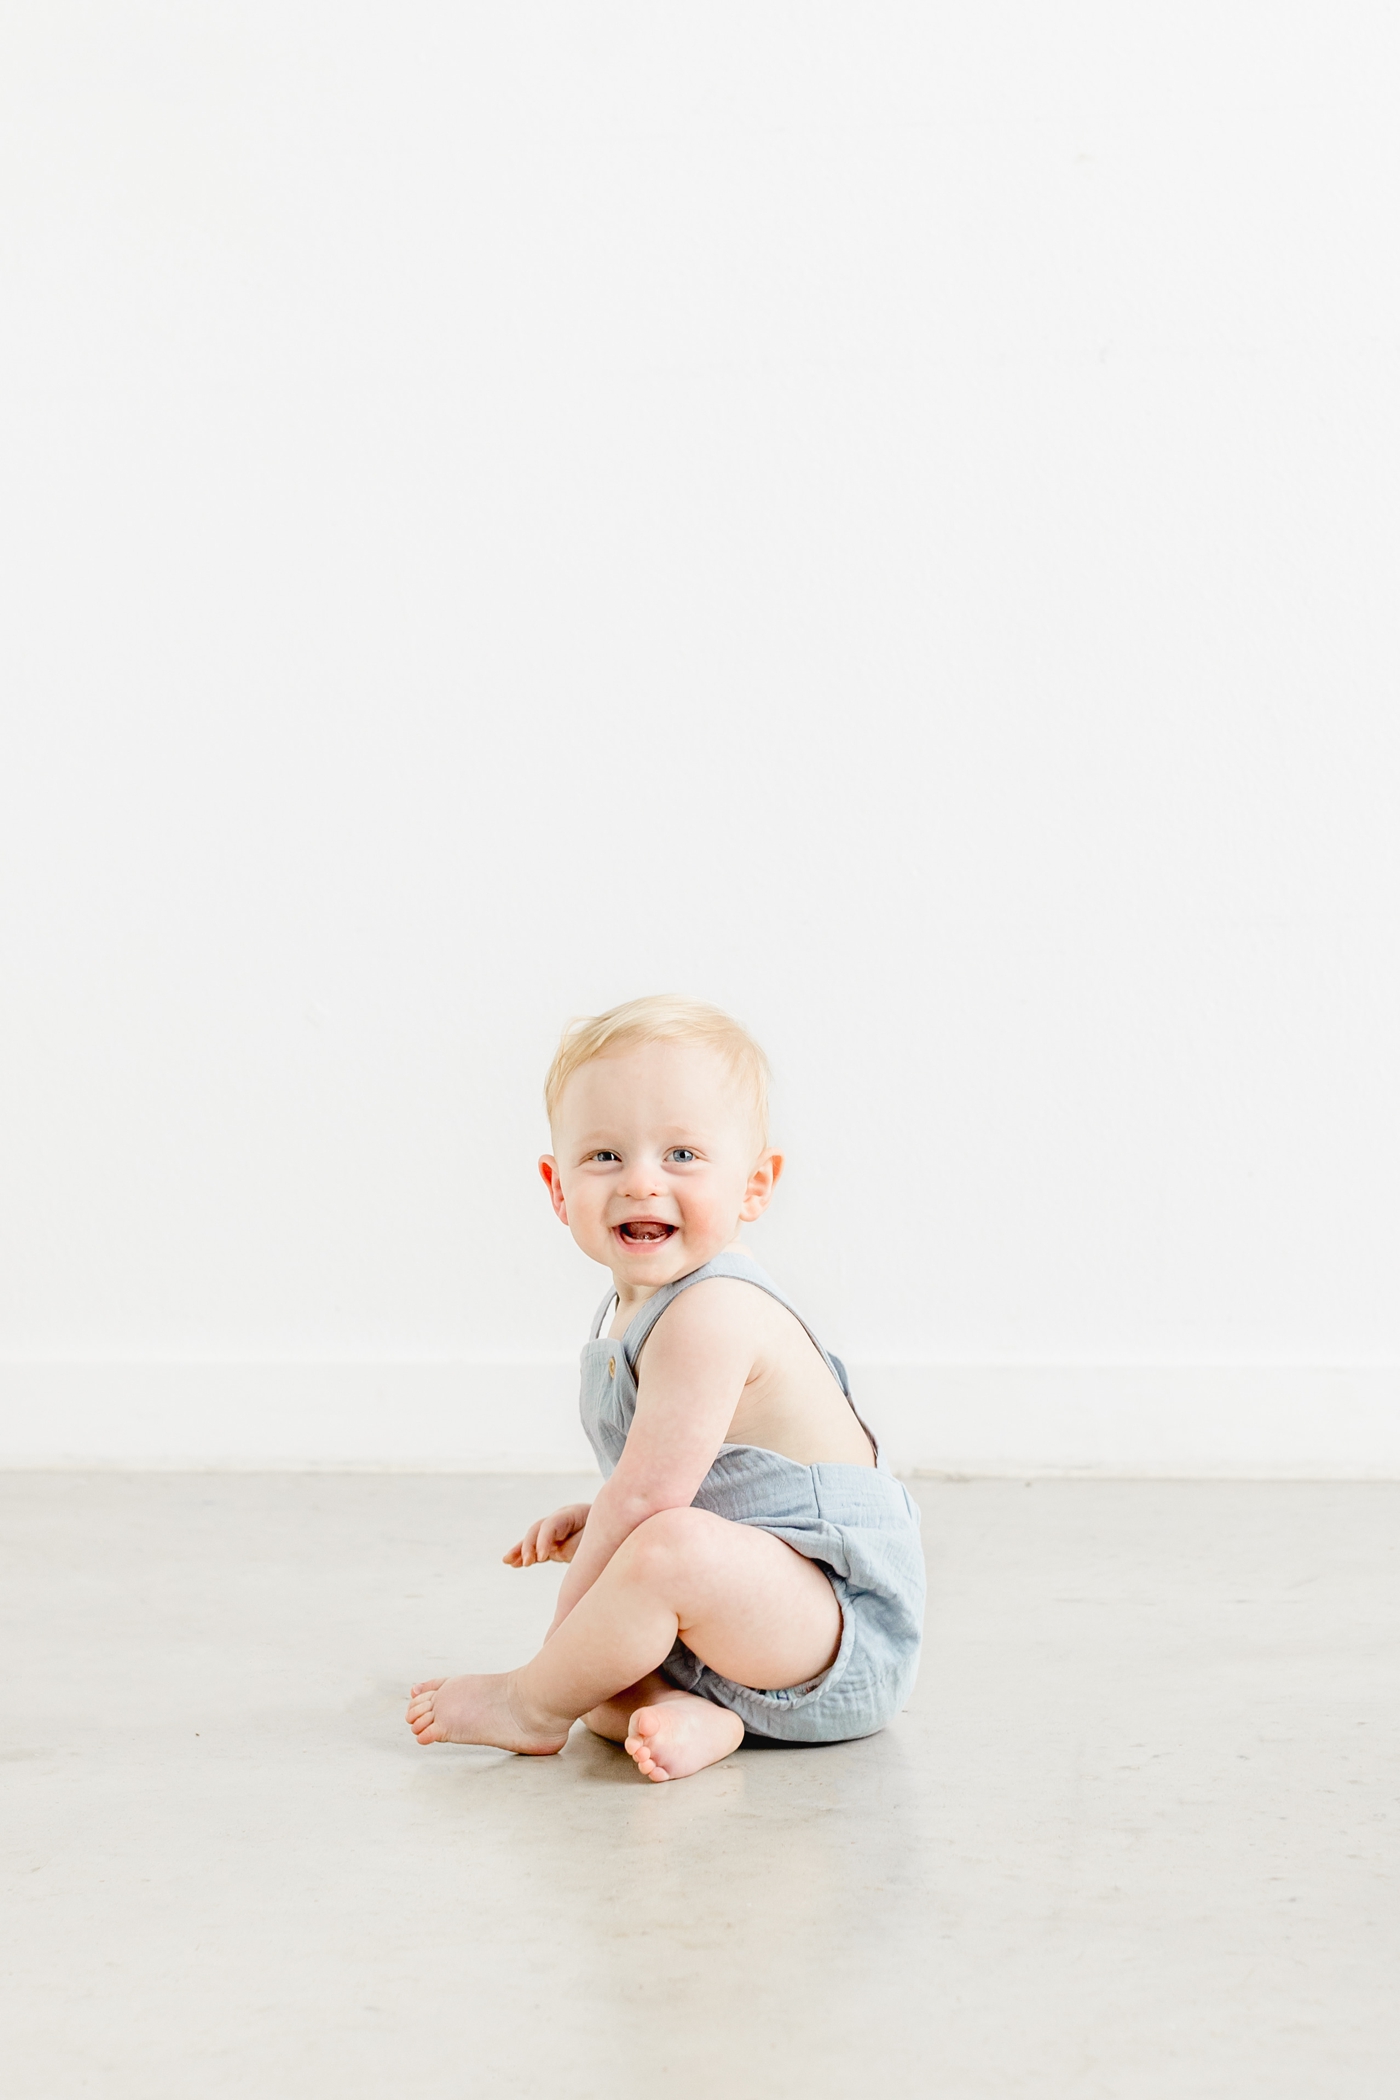 First birthday milestone session with baby crawling on studio floor. Photo by Sana Ahmed Photography.